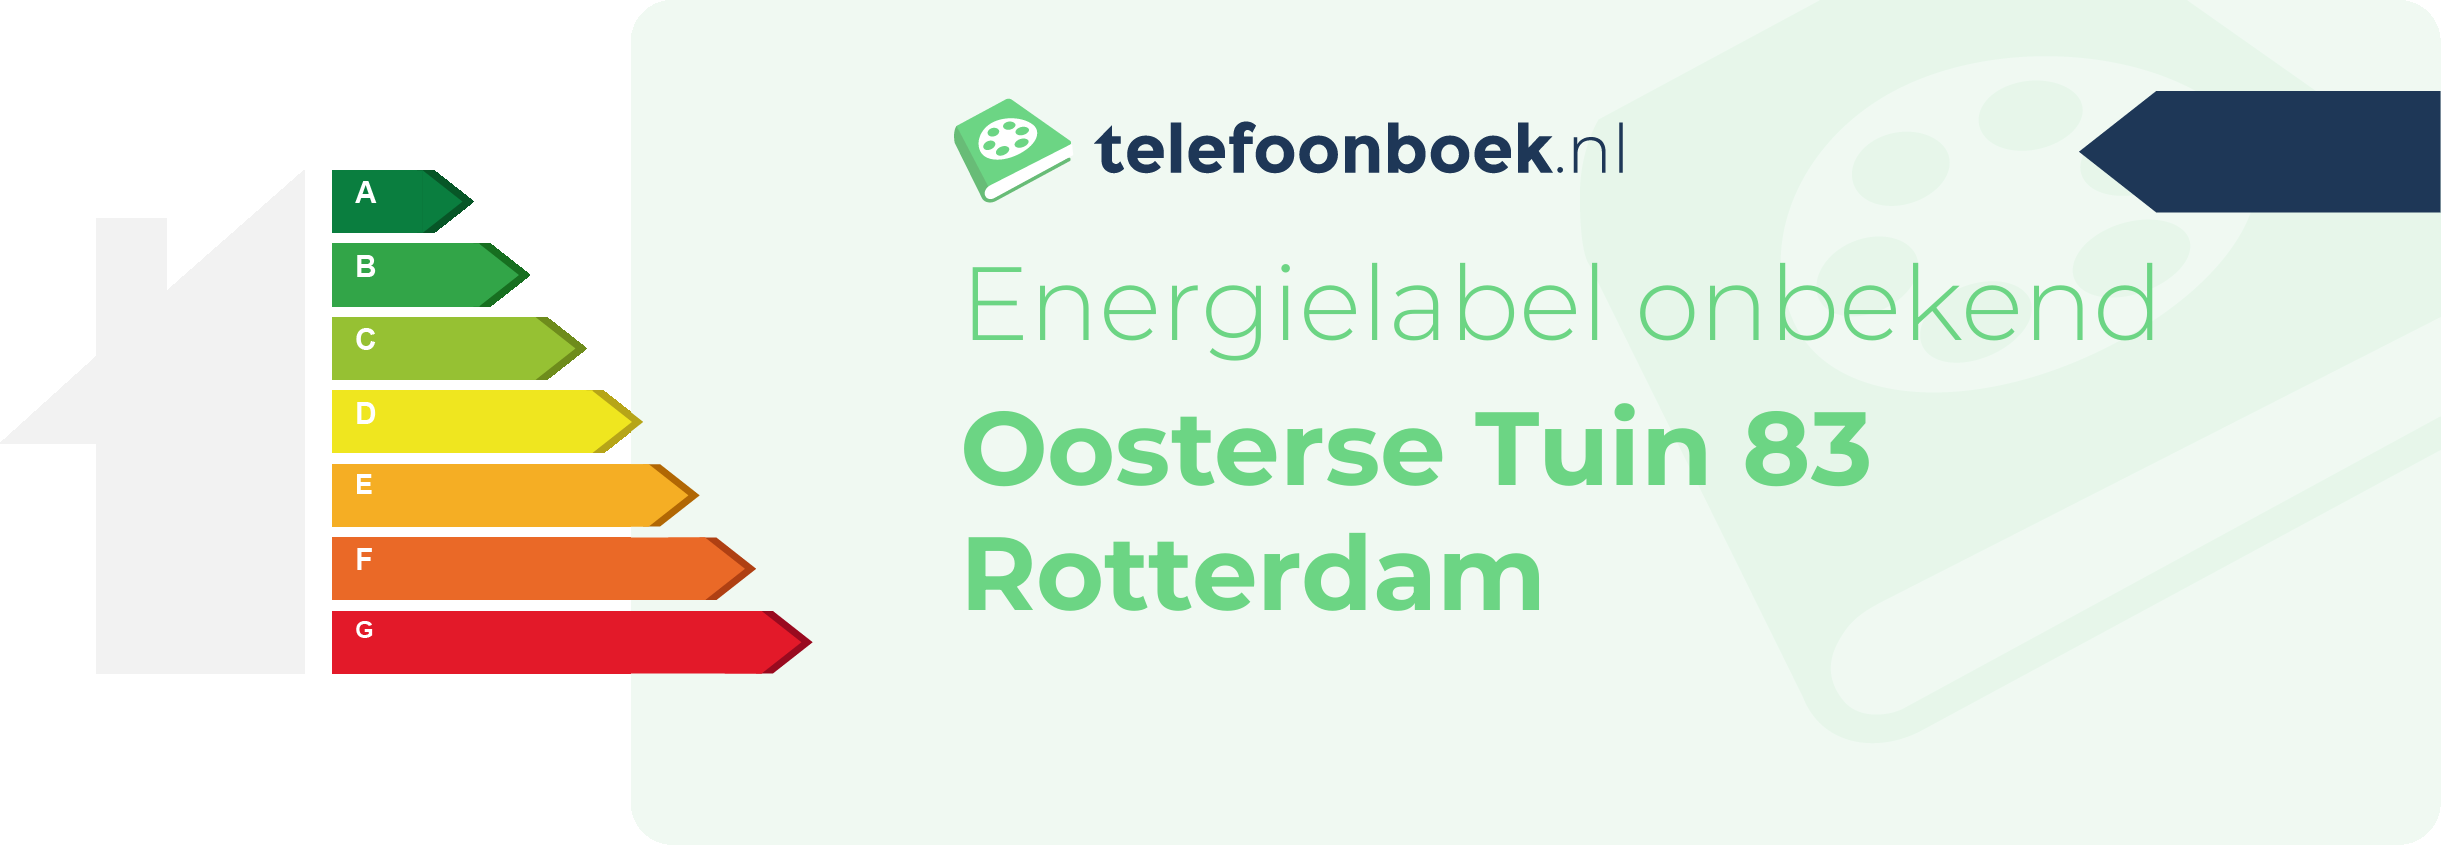 Energielabel Oosterse Tuin 83 Rotterdam